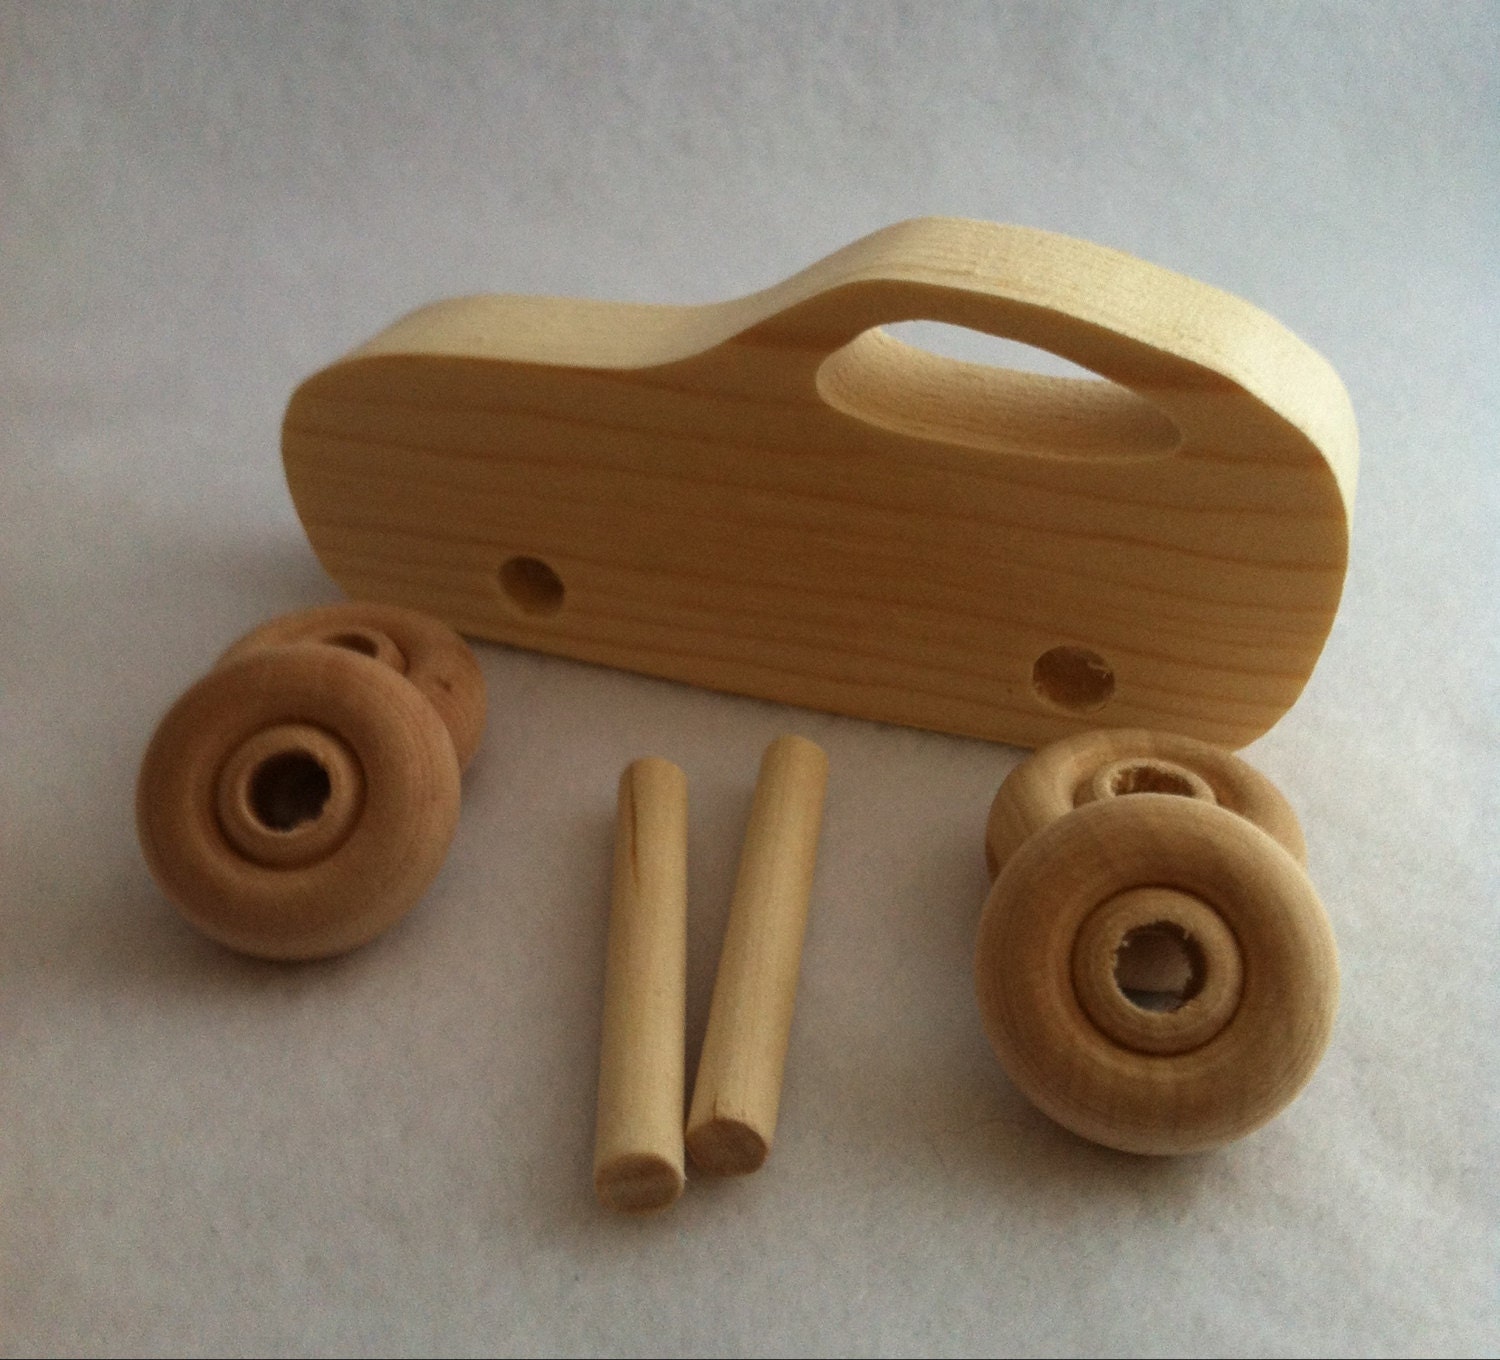 Wooden Toy Car KIT-Made from Recycled Wood